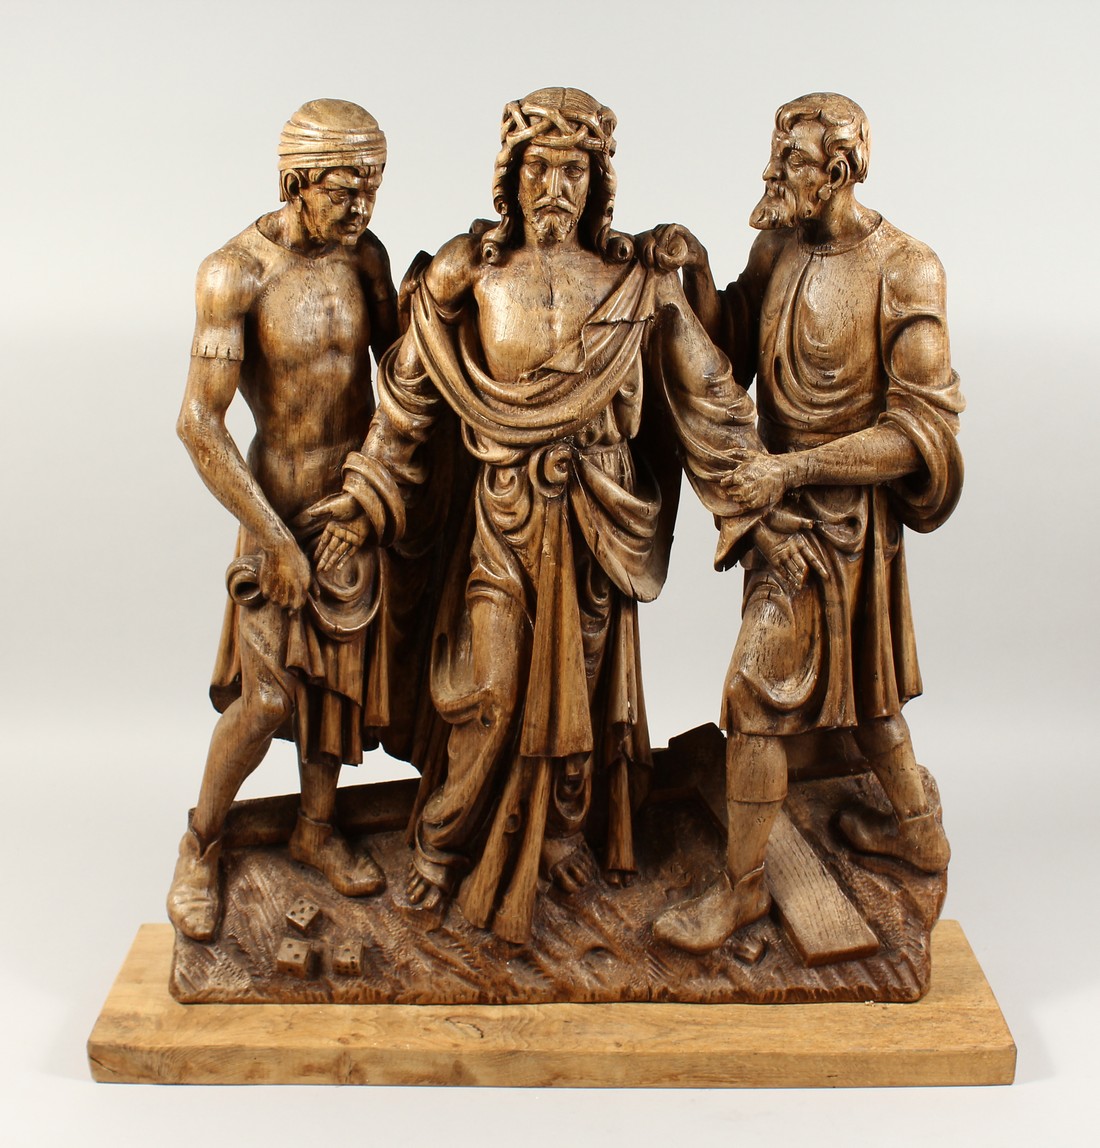 A SUPERB 18TH CENTURY GERMAN, CARVED LIMEWOOD GROUP, CHRIST with two men, the base with a cross